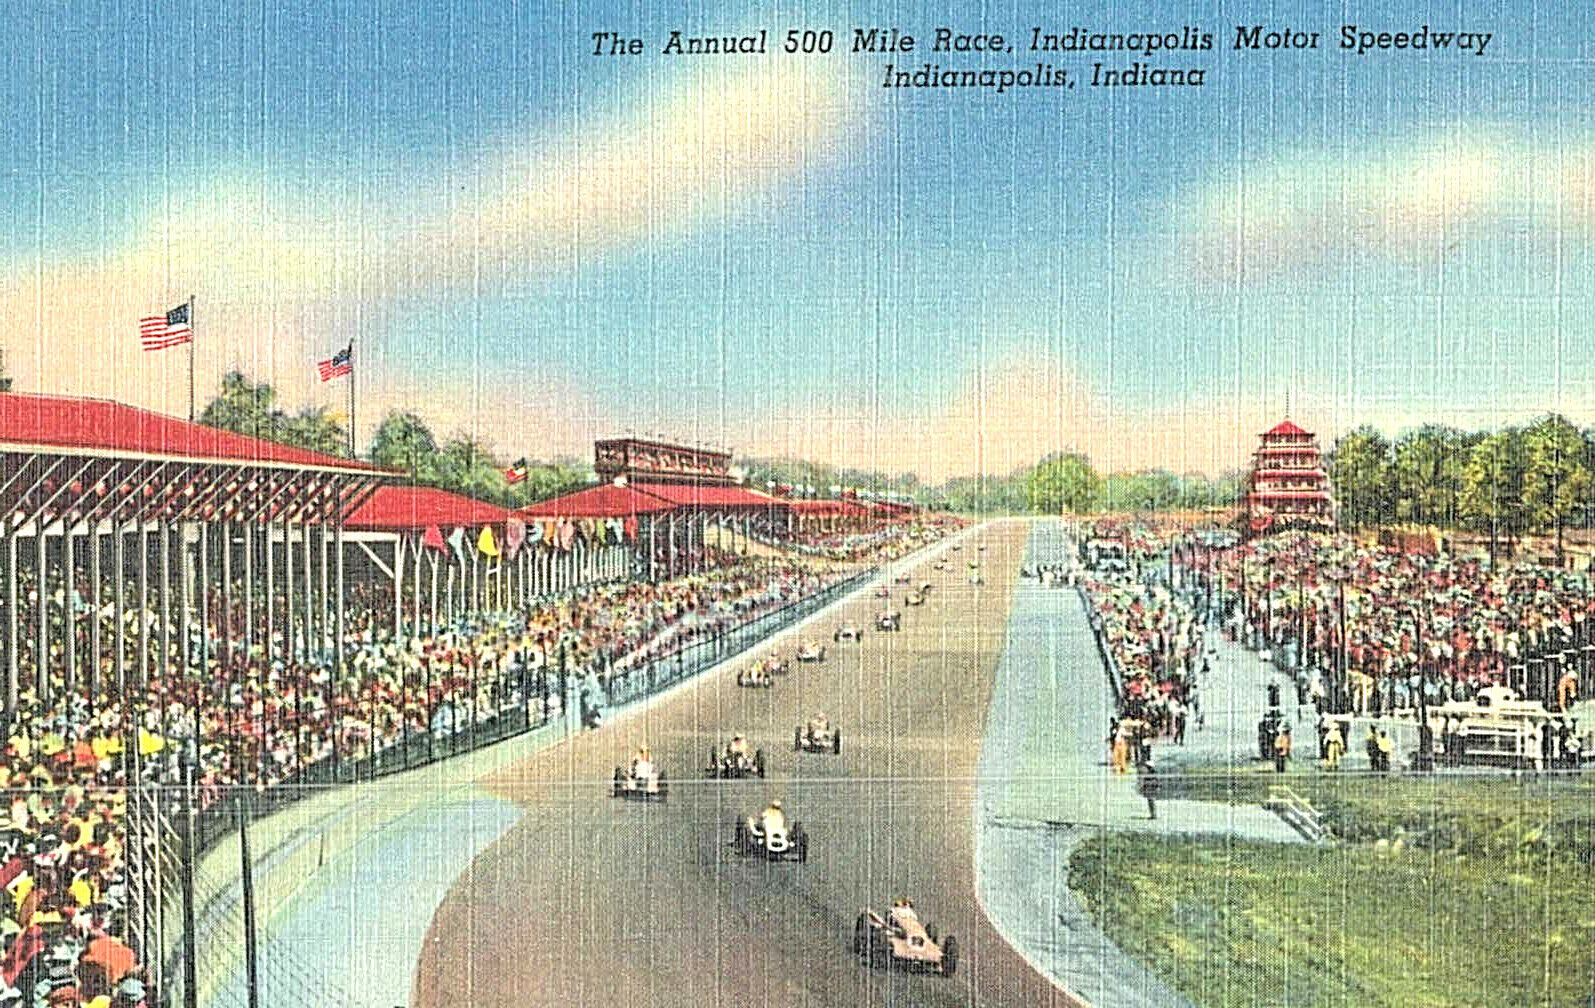 Postcard-World Famous Memorial Day Auto Race, Indianapolis Motor Speedway, IN